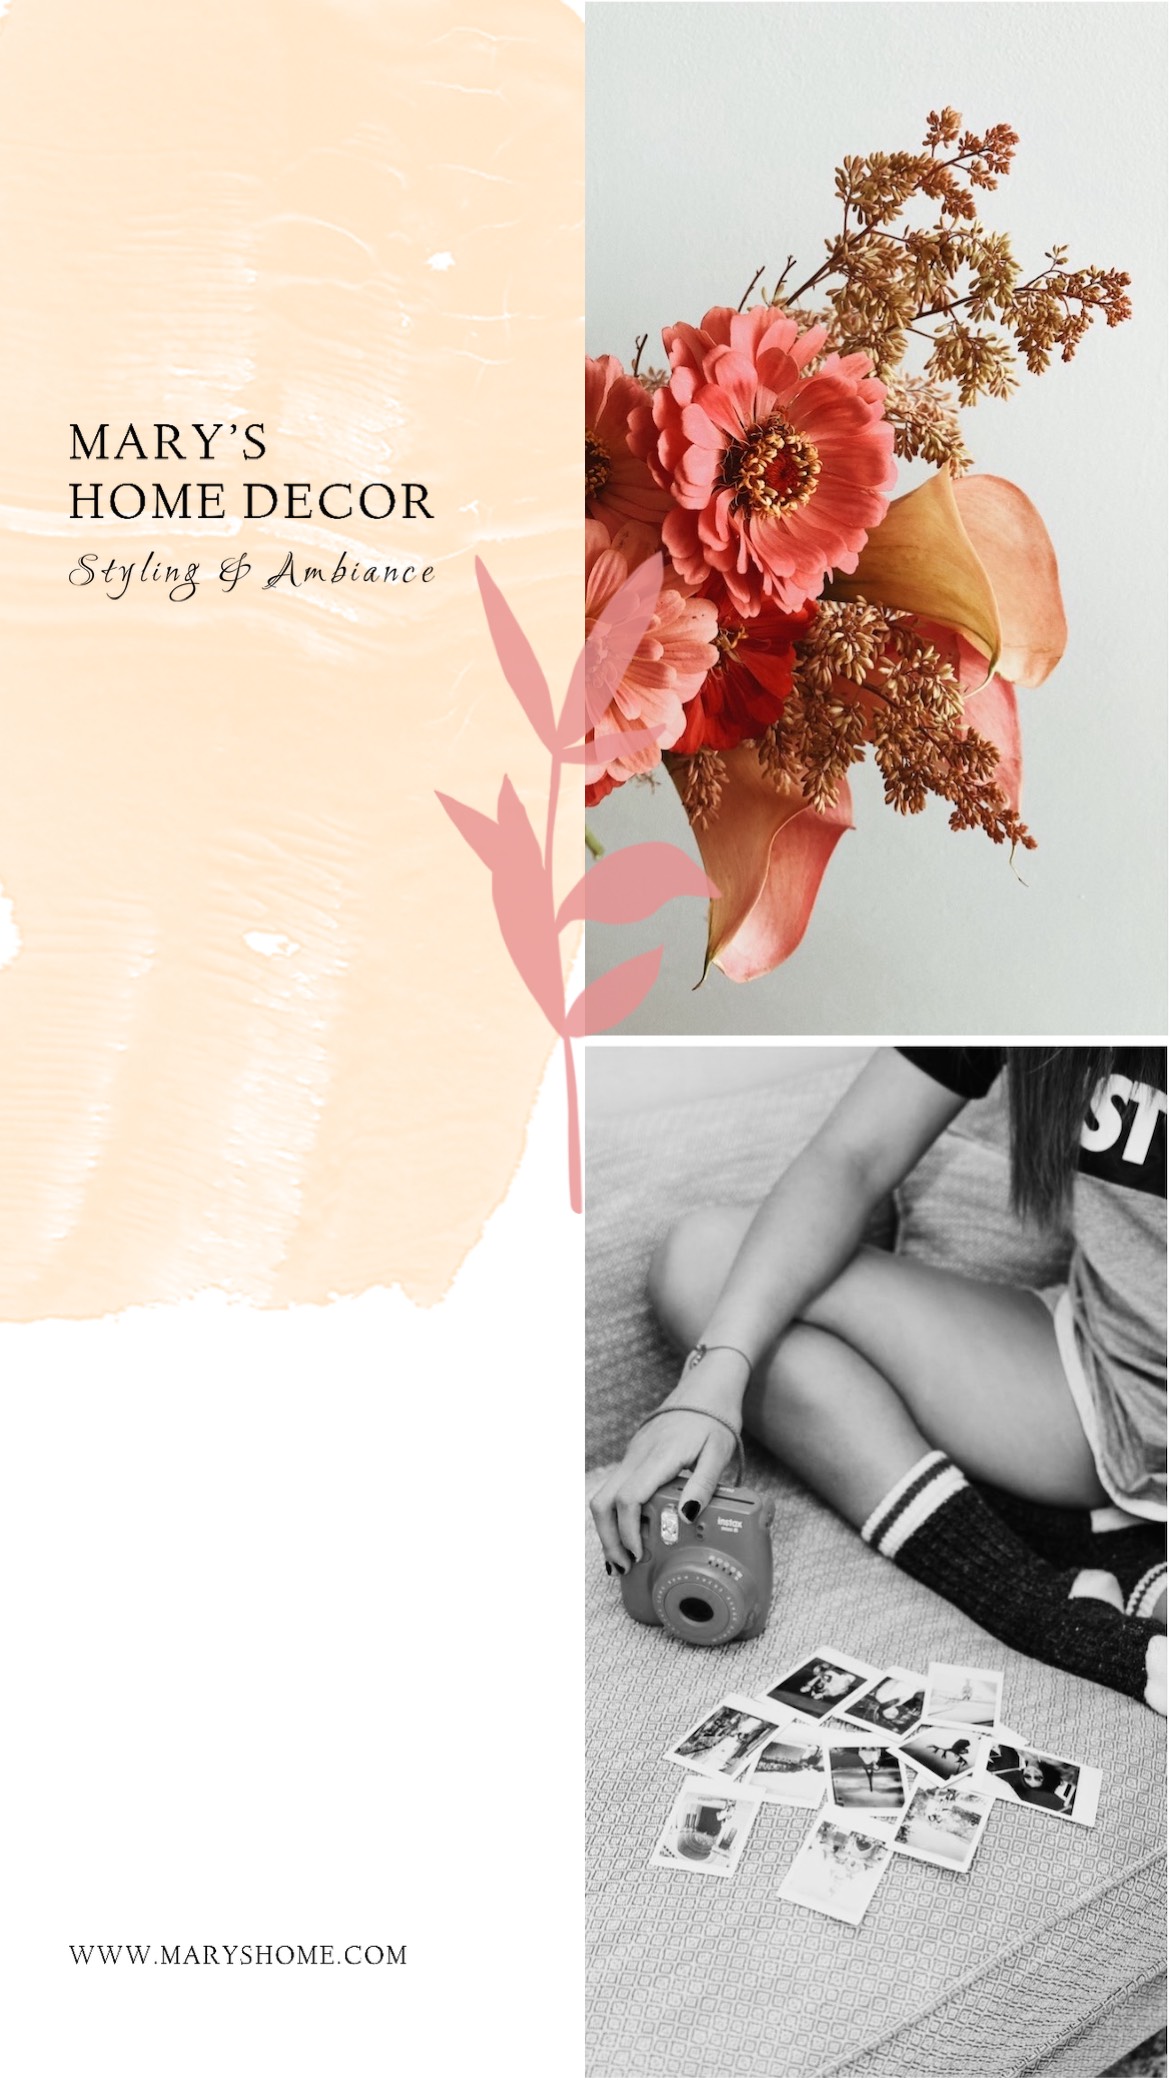 Home decor styling, ambiance & flowers Classy template